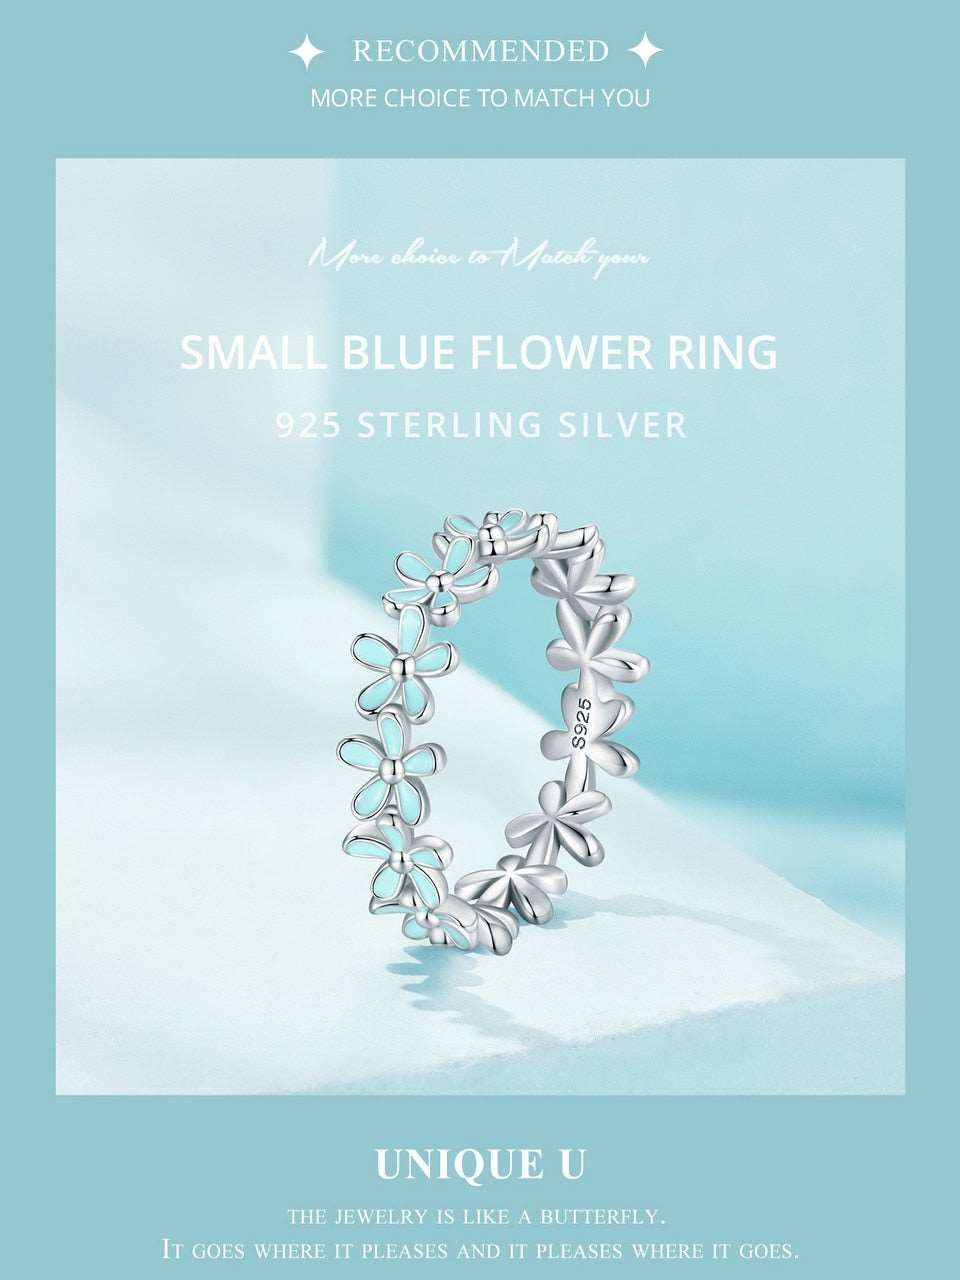 Blue & Pink Flower Rings - M&H FashionBlue & Pink Flower RingsRingsM&H FashionM&H Fashion200000369:698;200000226:193#SCR6815SCR681Blue & Pink Flower RingsM&H FashionRingsM&H FashionThe Blue &amp; Pink Flower Rings are a stylish and trendy accessory. They are made of S925+Enamel process+Plated platinum and have a width of 2mm. The rings feature Blue & Pink Flower Rings